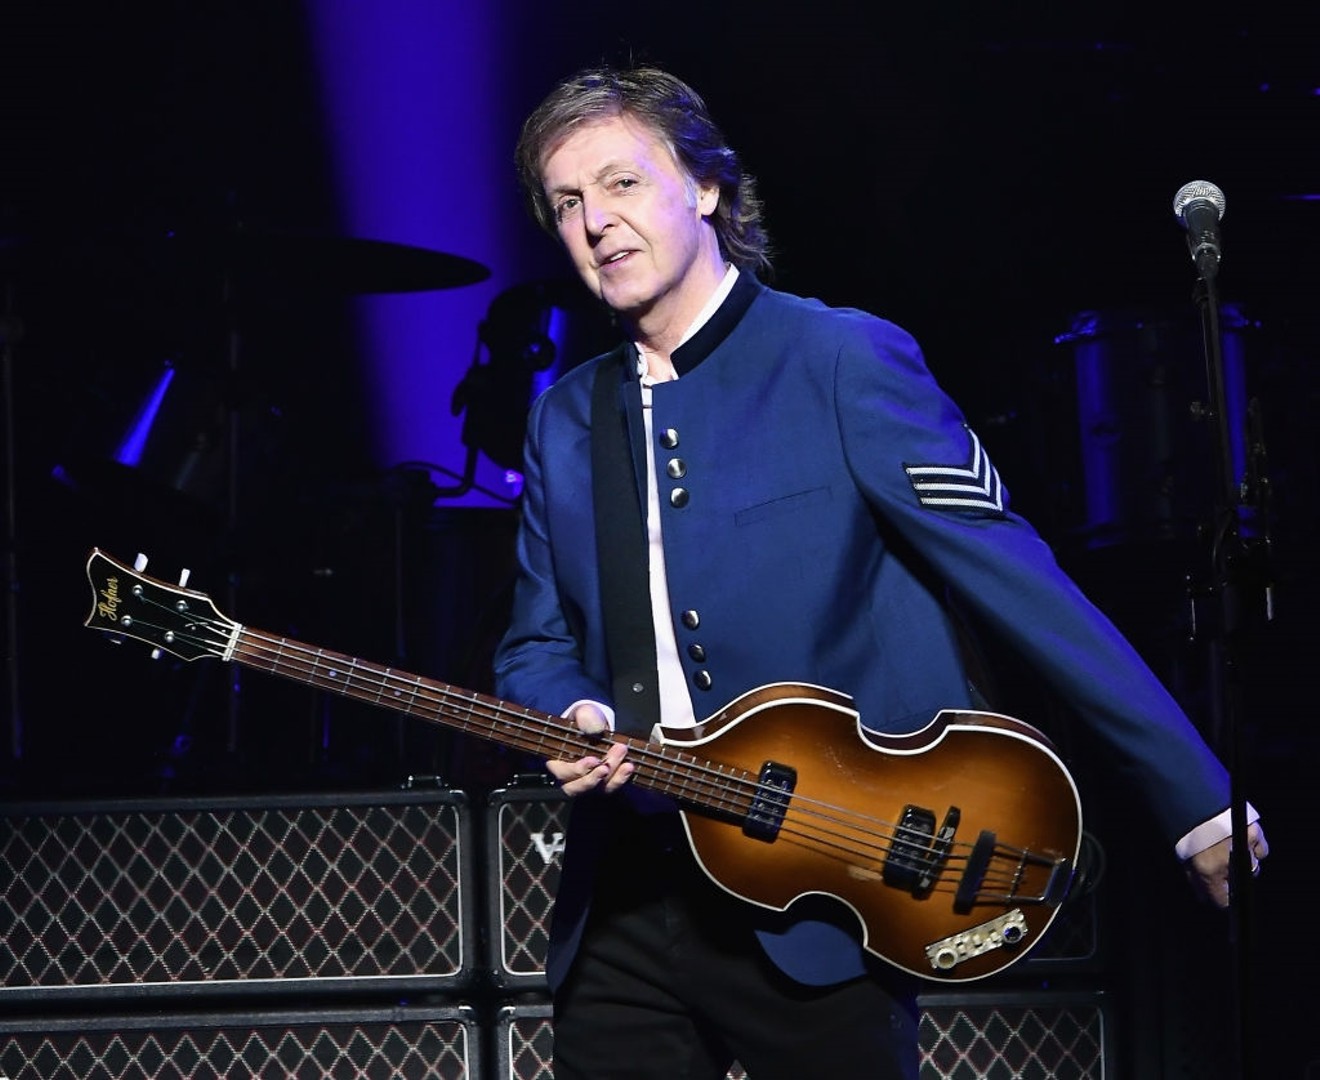 Paul McCartney makes the list with a song to someone else's kid.